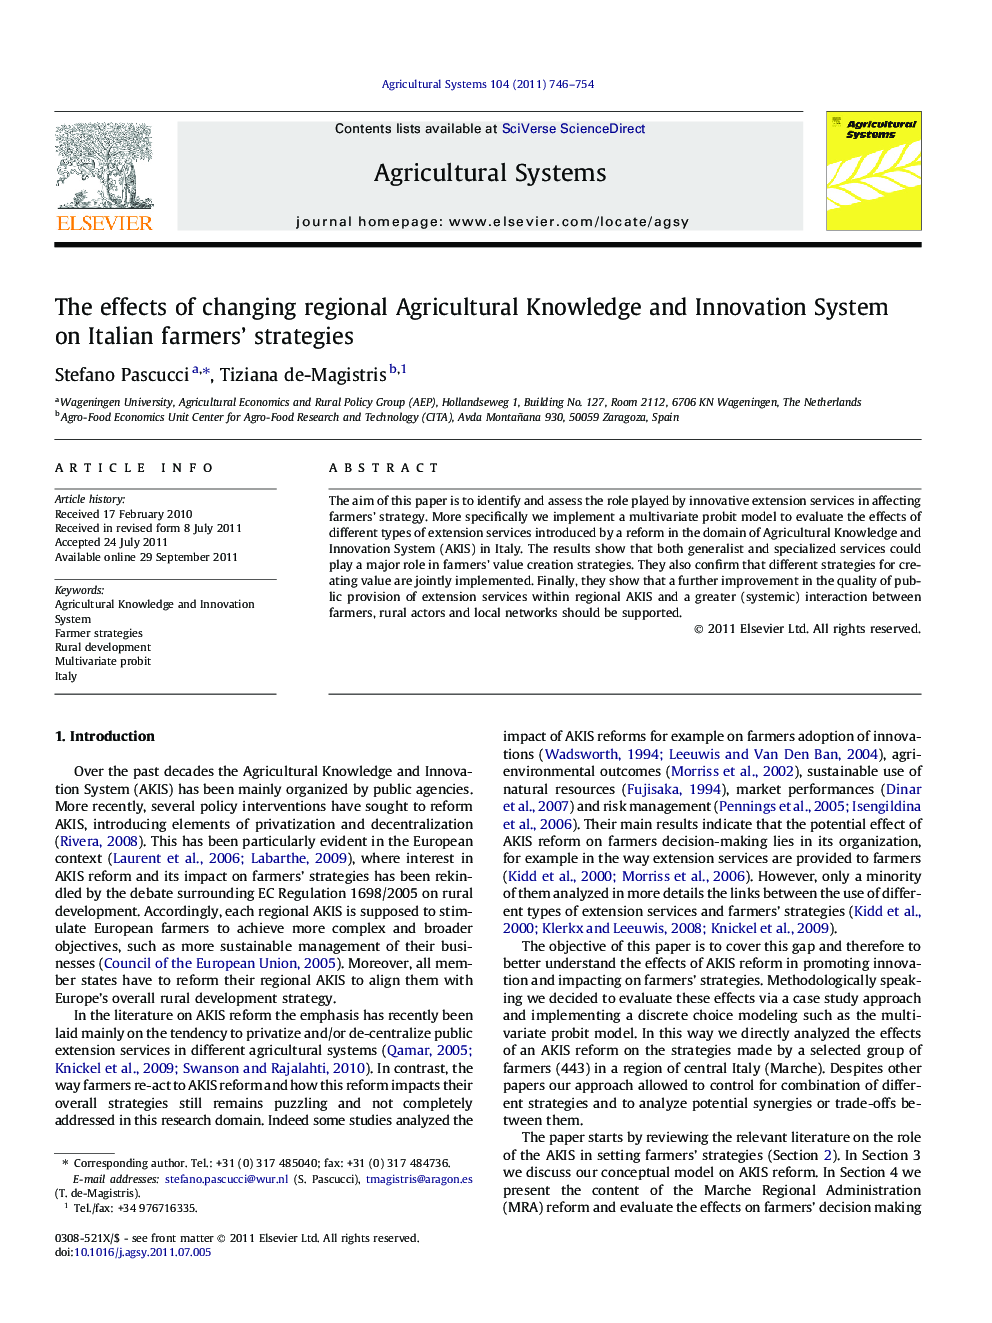 The effects of changing regional Agricultural Knowledge and Innovation System on Italian farmers’ strategies